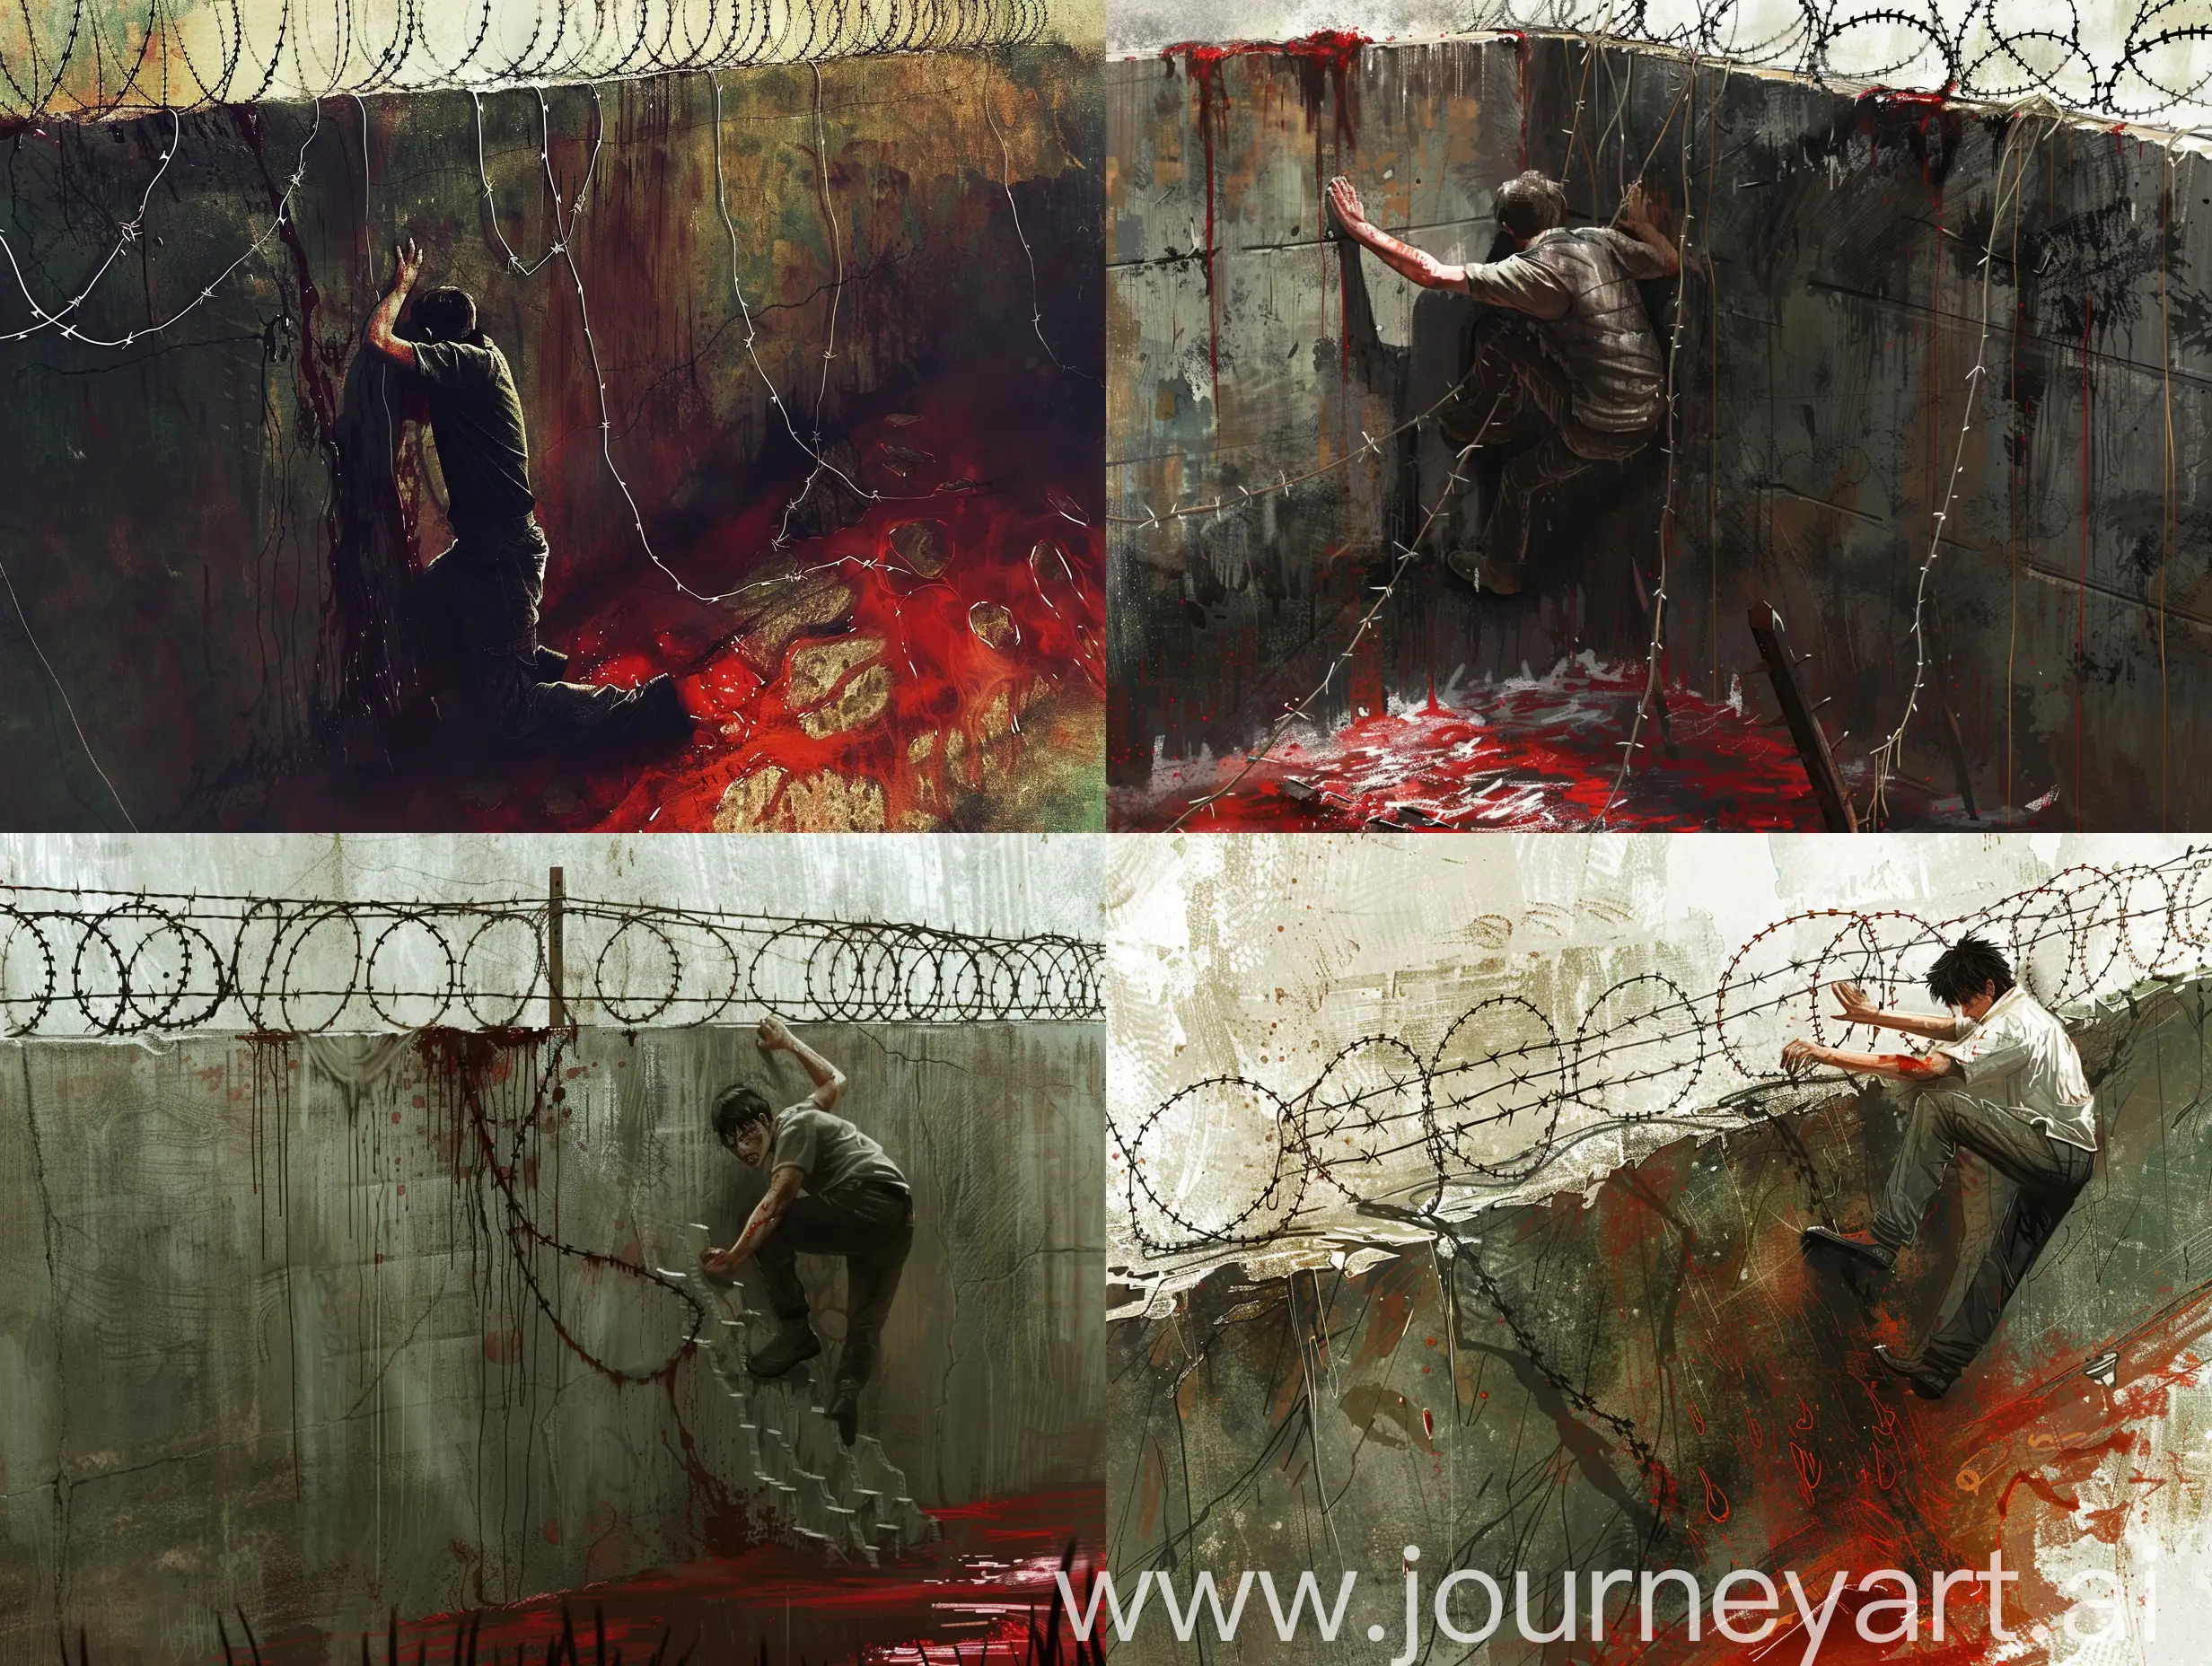 Determined-Man-Overcoming-Challenging-Wall-with-Barbed-Wires-in-a-RedStained-Landscape